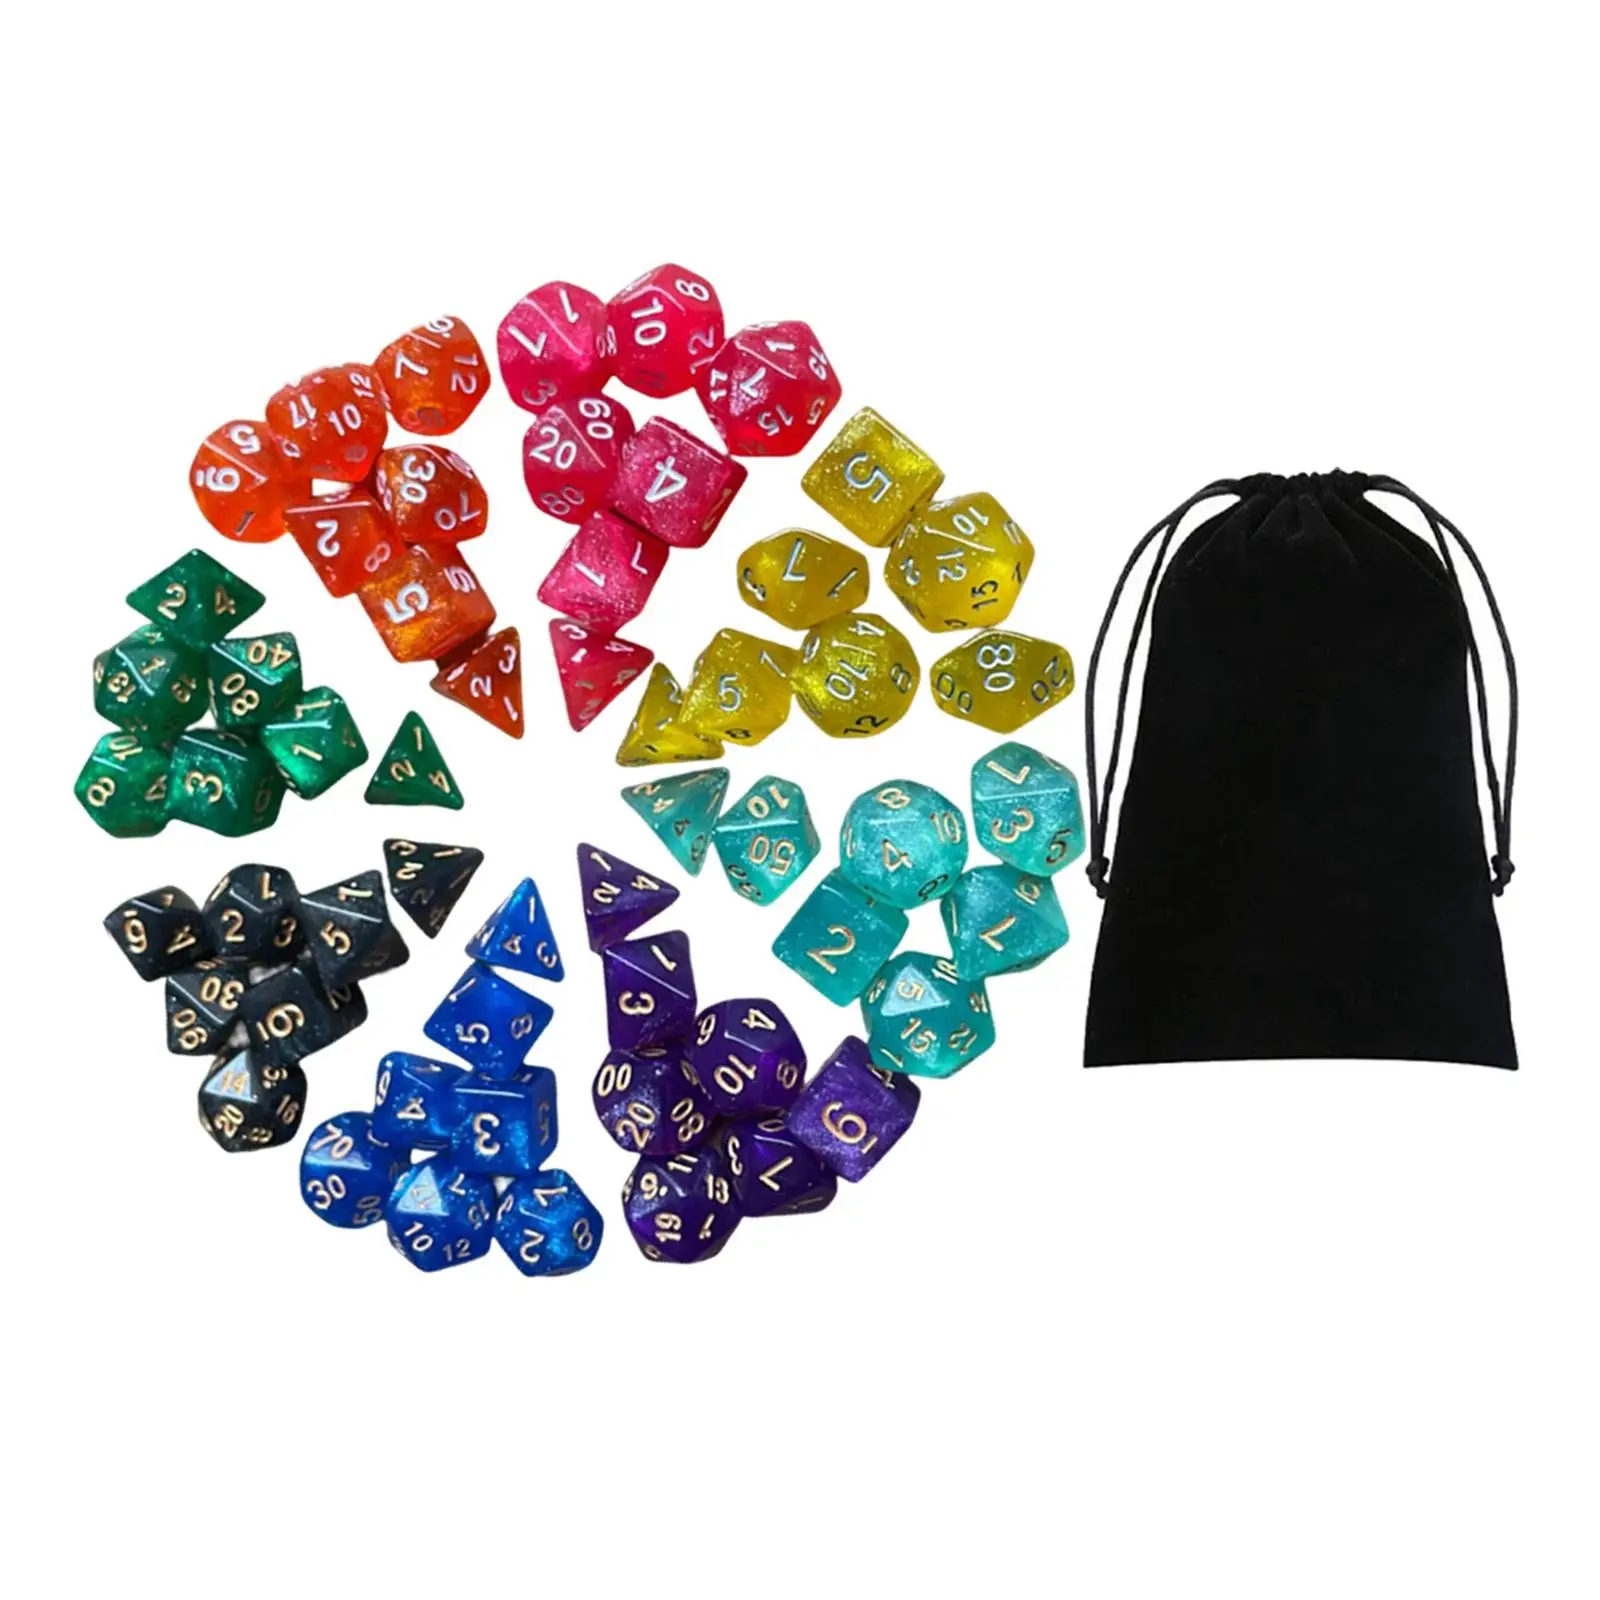 Engraved Polyhedral Dices Colored 56x Game Dices Rolling Dices for Parties